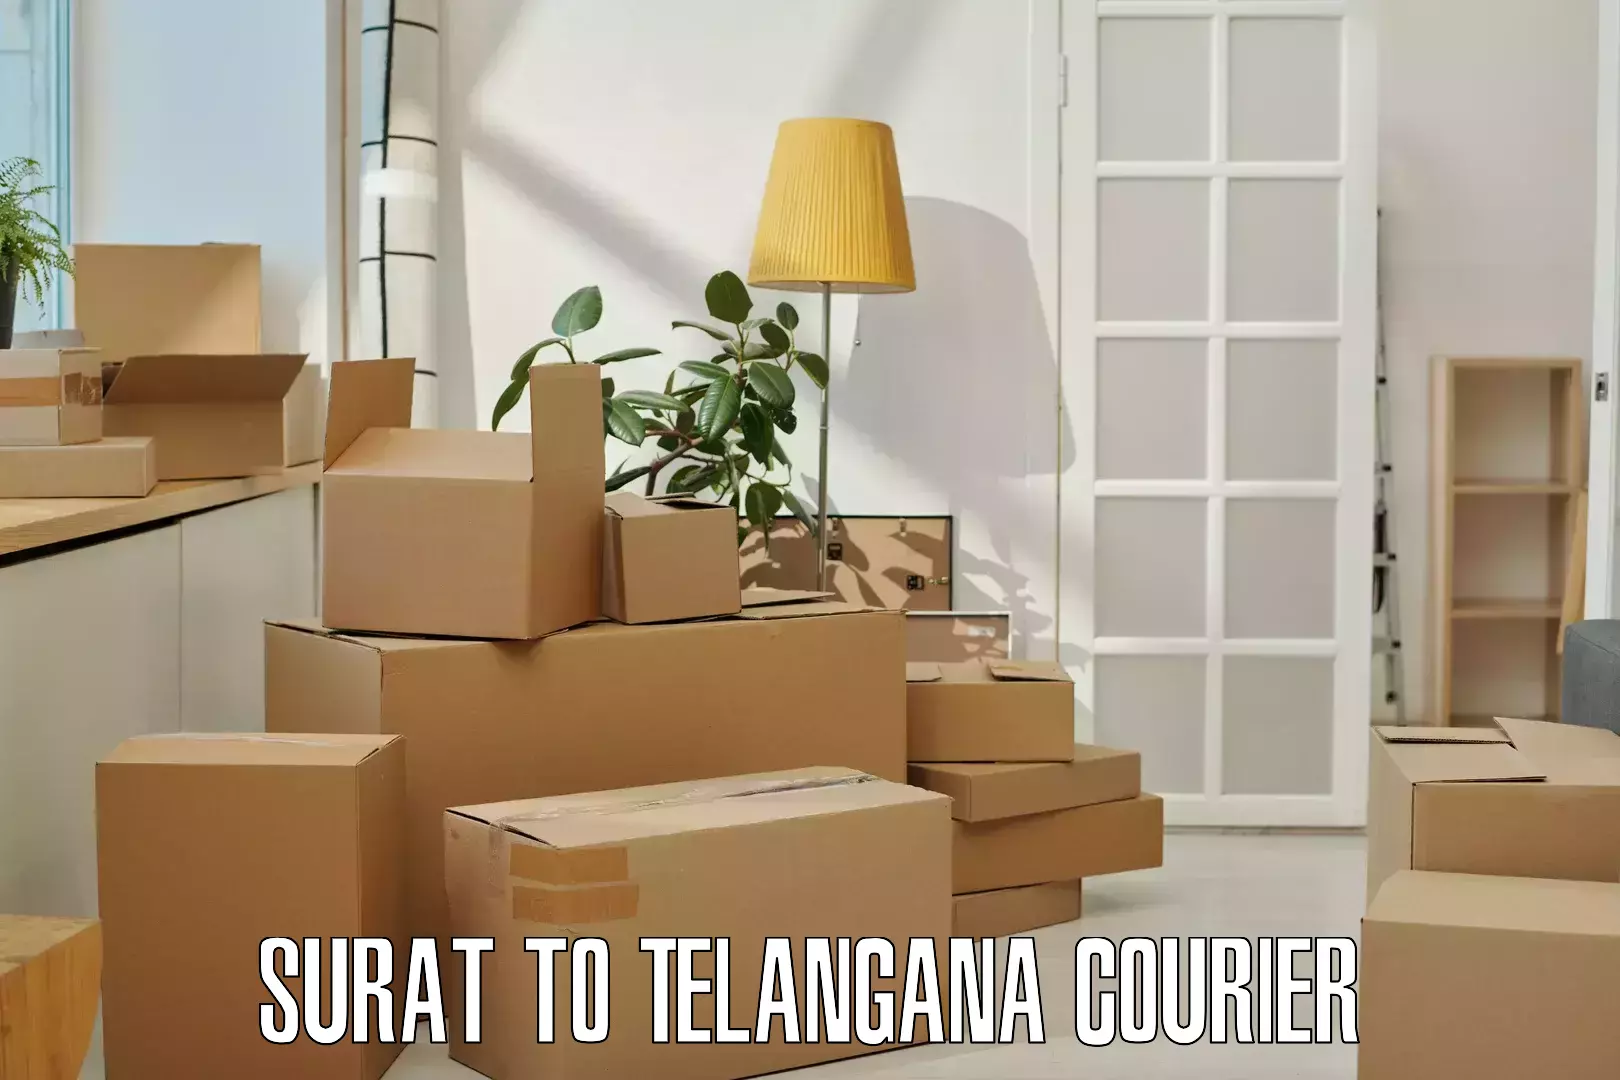 Courier services in Surat to Bellampalli